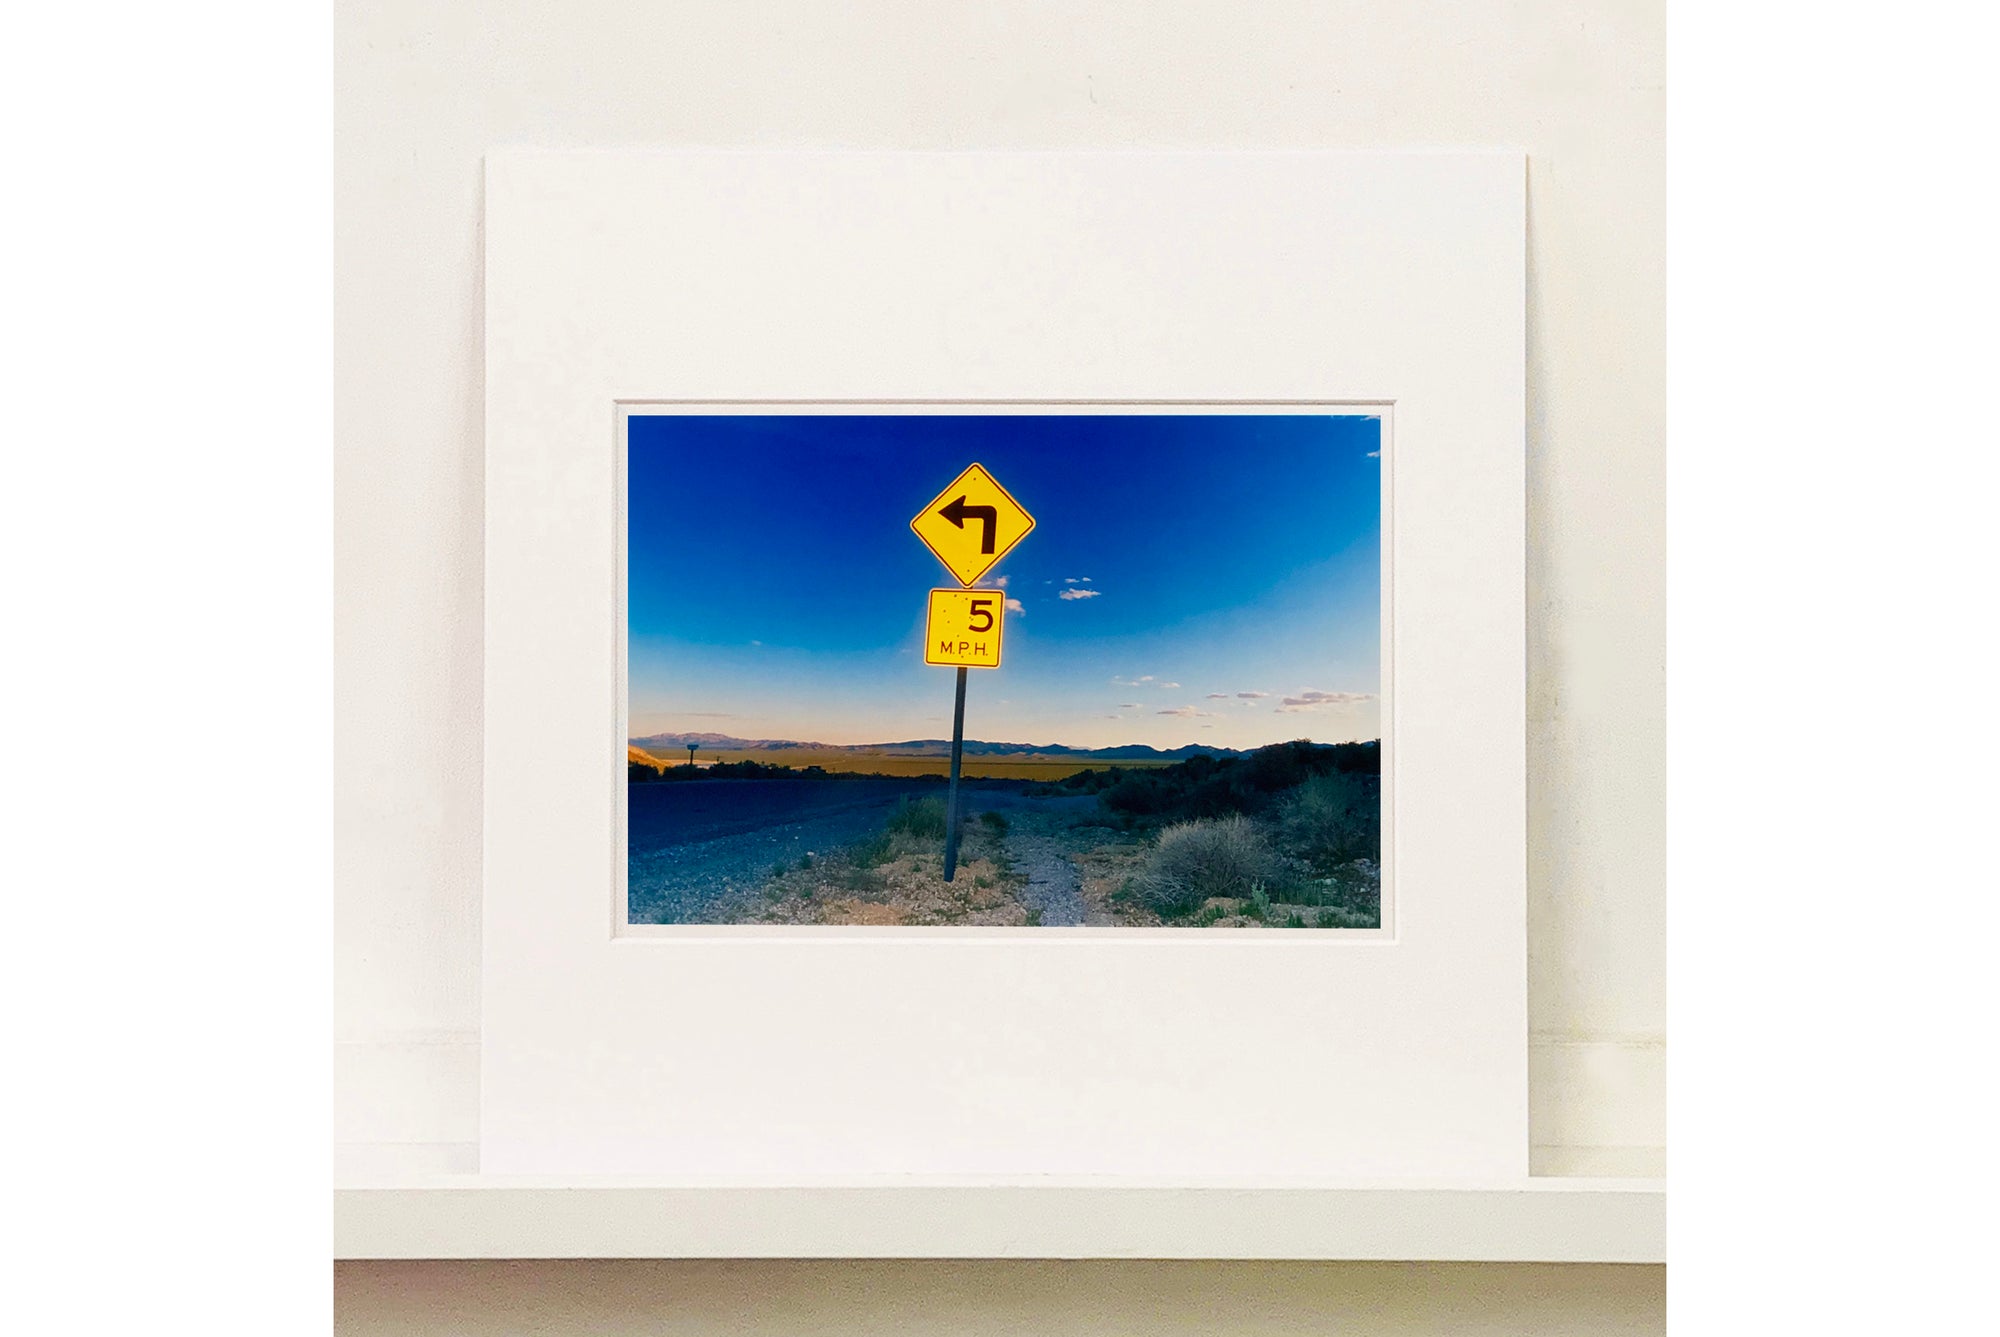 Part of Richard Heeps' 'Dream in Colour' Series, this beautiful picture taken at dusk captures the sunset in the valley.  It was photographed in what was once a goldmine, now a ghost town. The 5MPH sign seems so cautious, but on closer inspection you see that it is peppered with bullet holes, serving as a reminder of its Western past. 